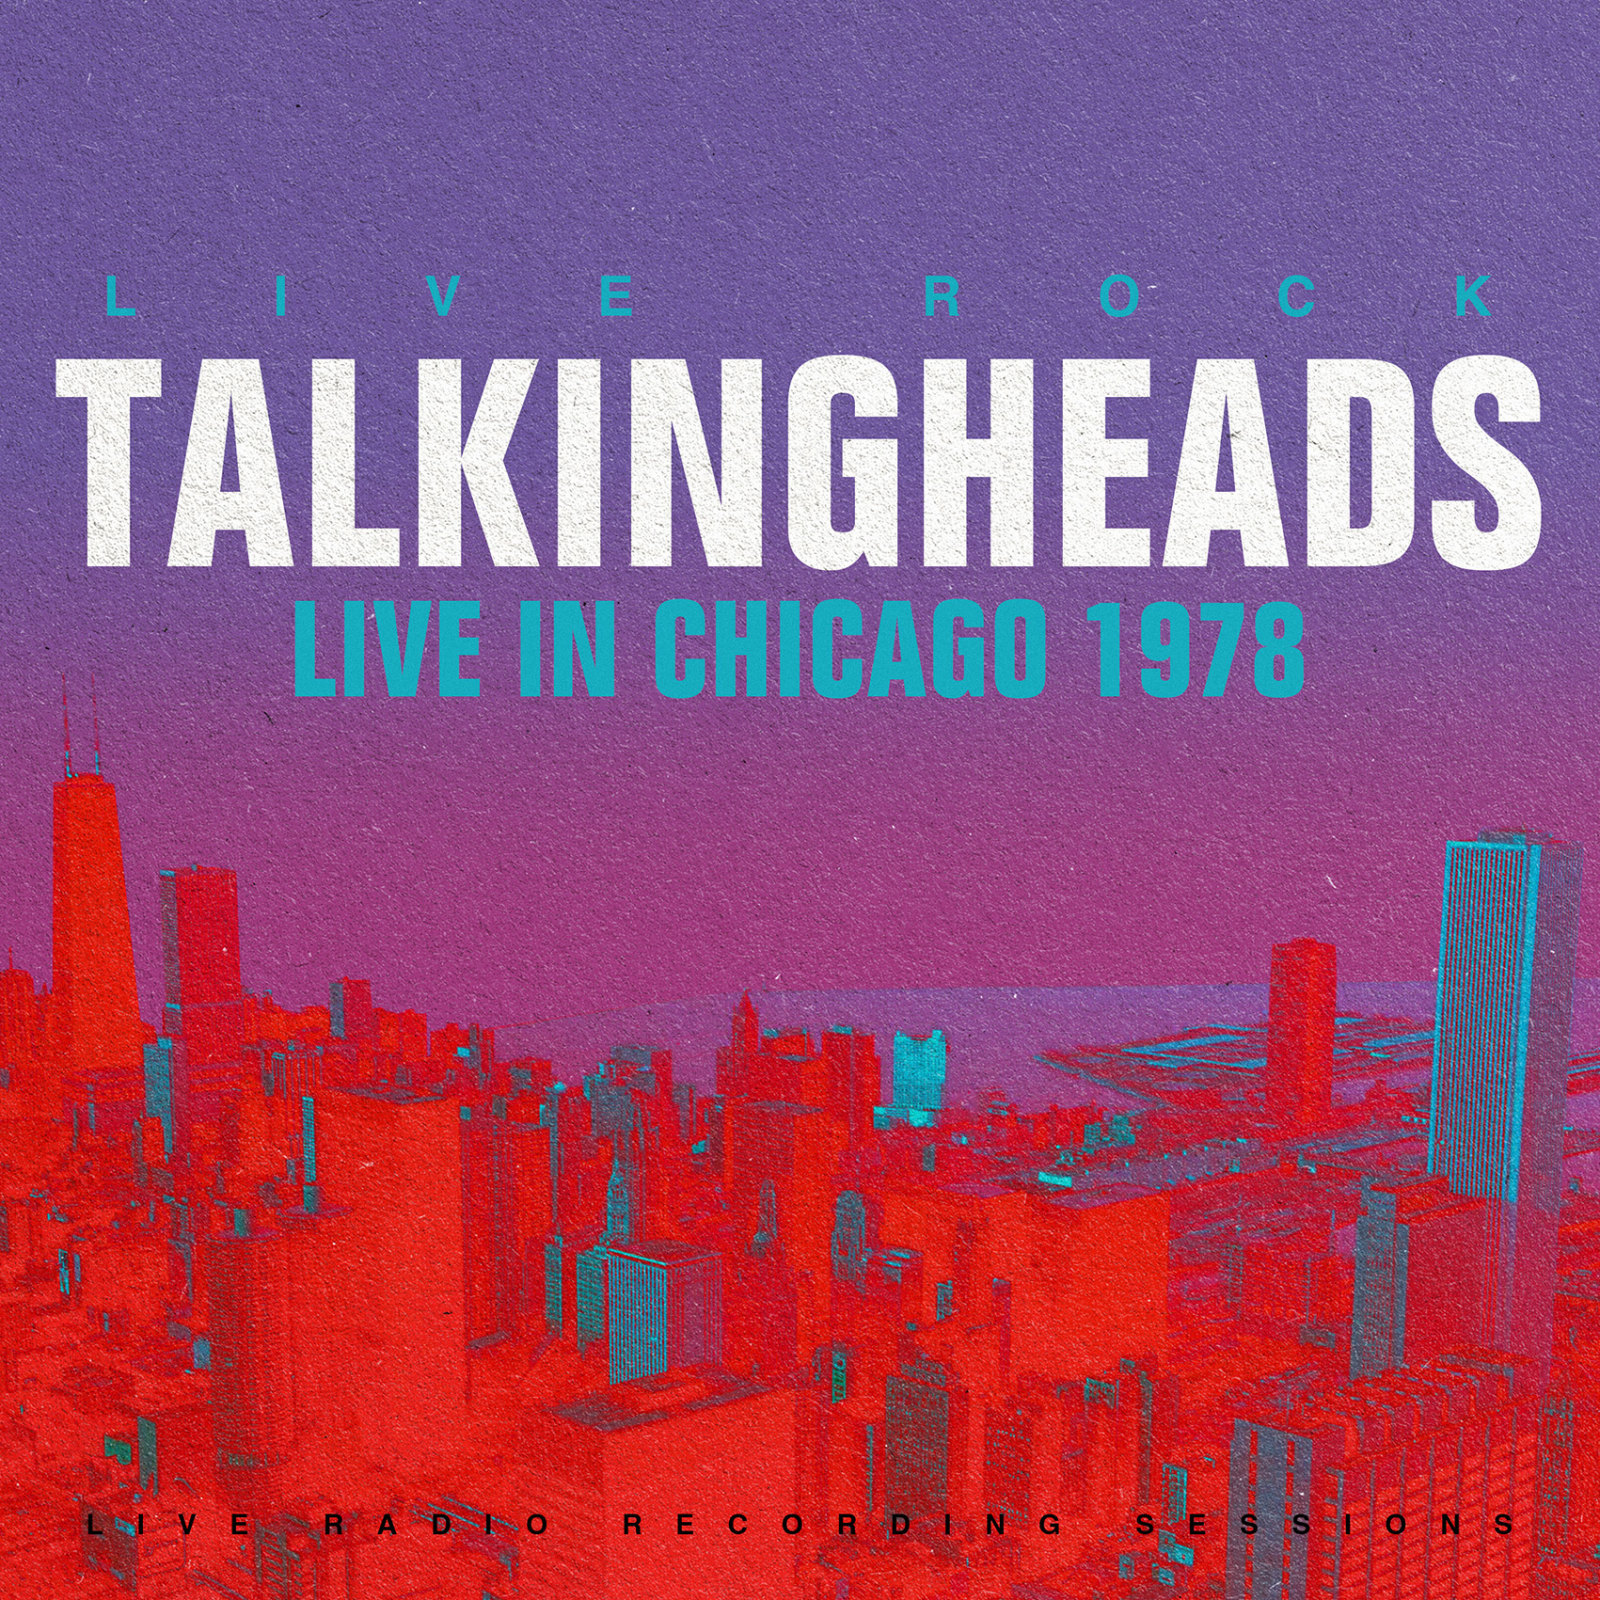 TALKING HEADS - Live in Chicago 1978